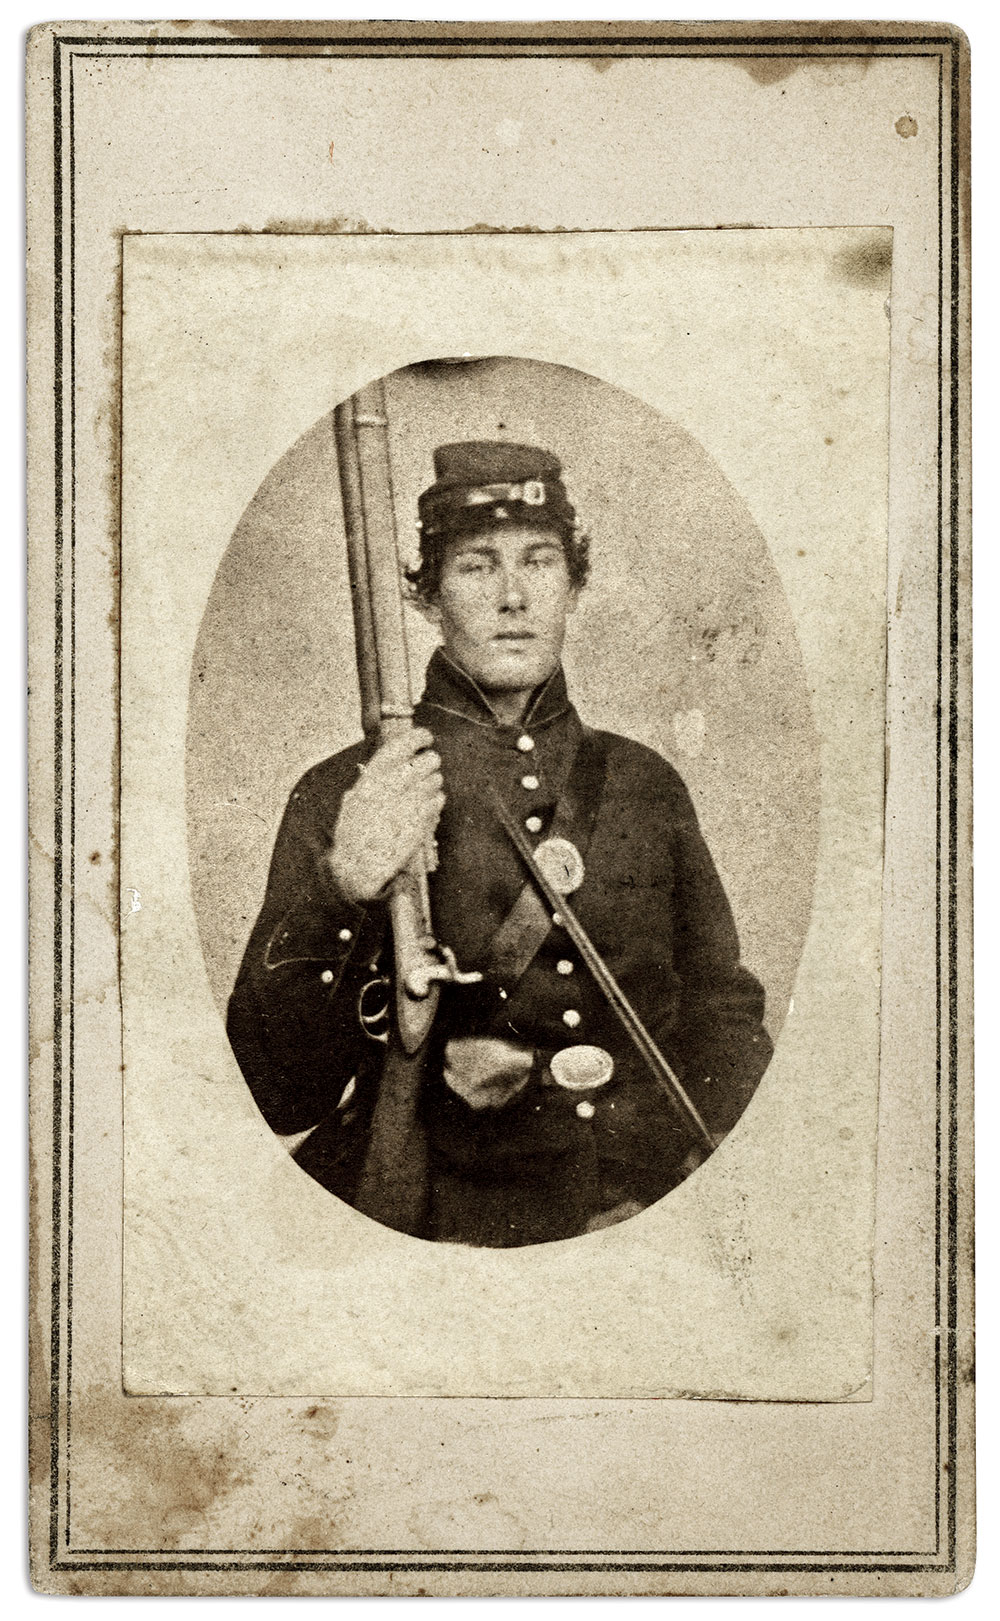 William H. Day. Carte de visite copy of period hard image by T.E. Lang of Bridgewater, Maine.